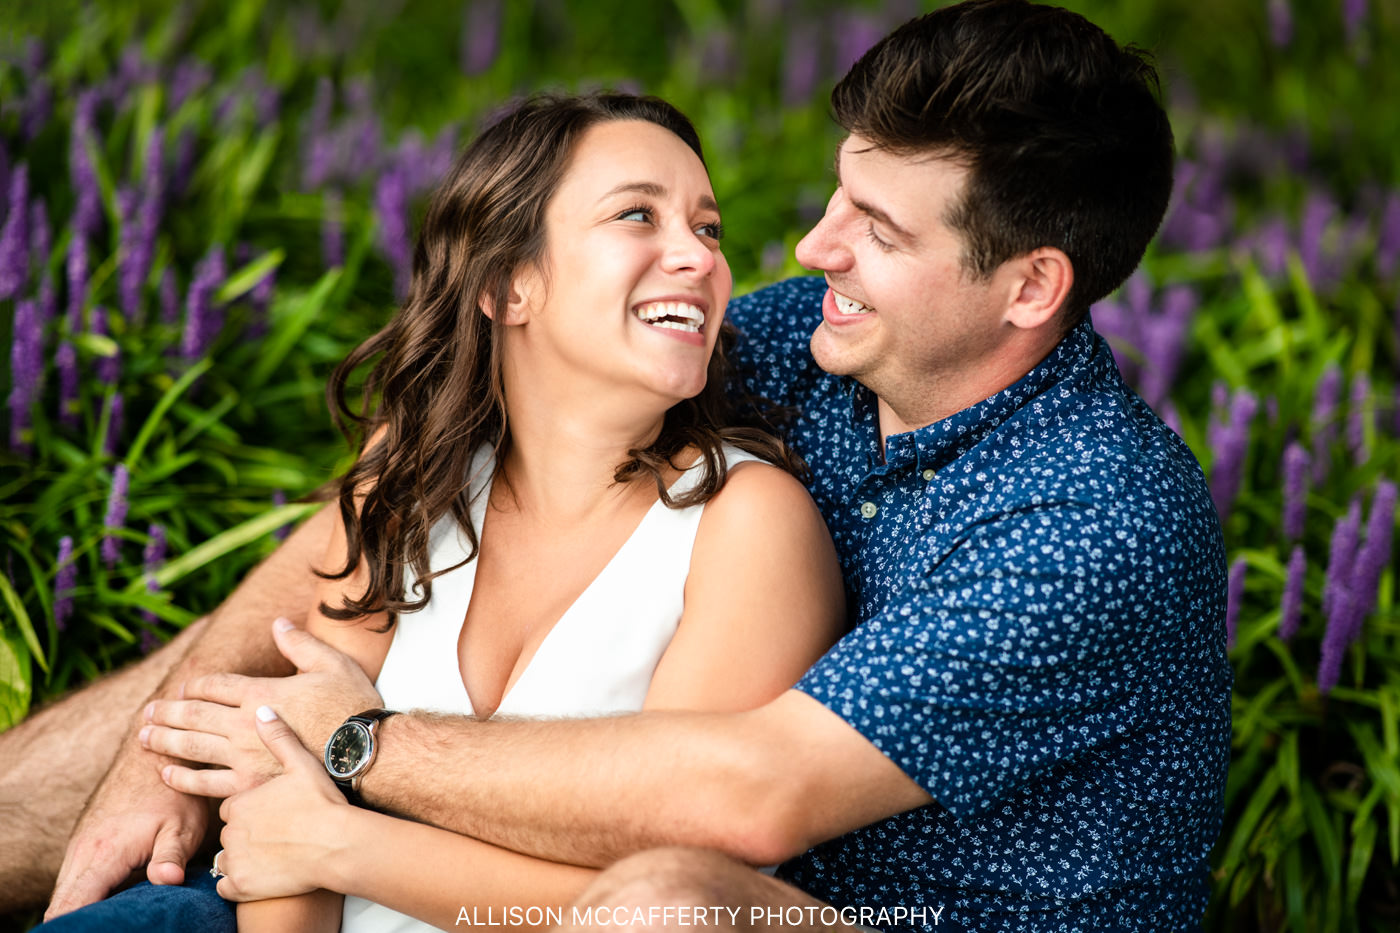 Engagement Photos at West Chester University